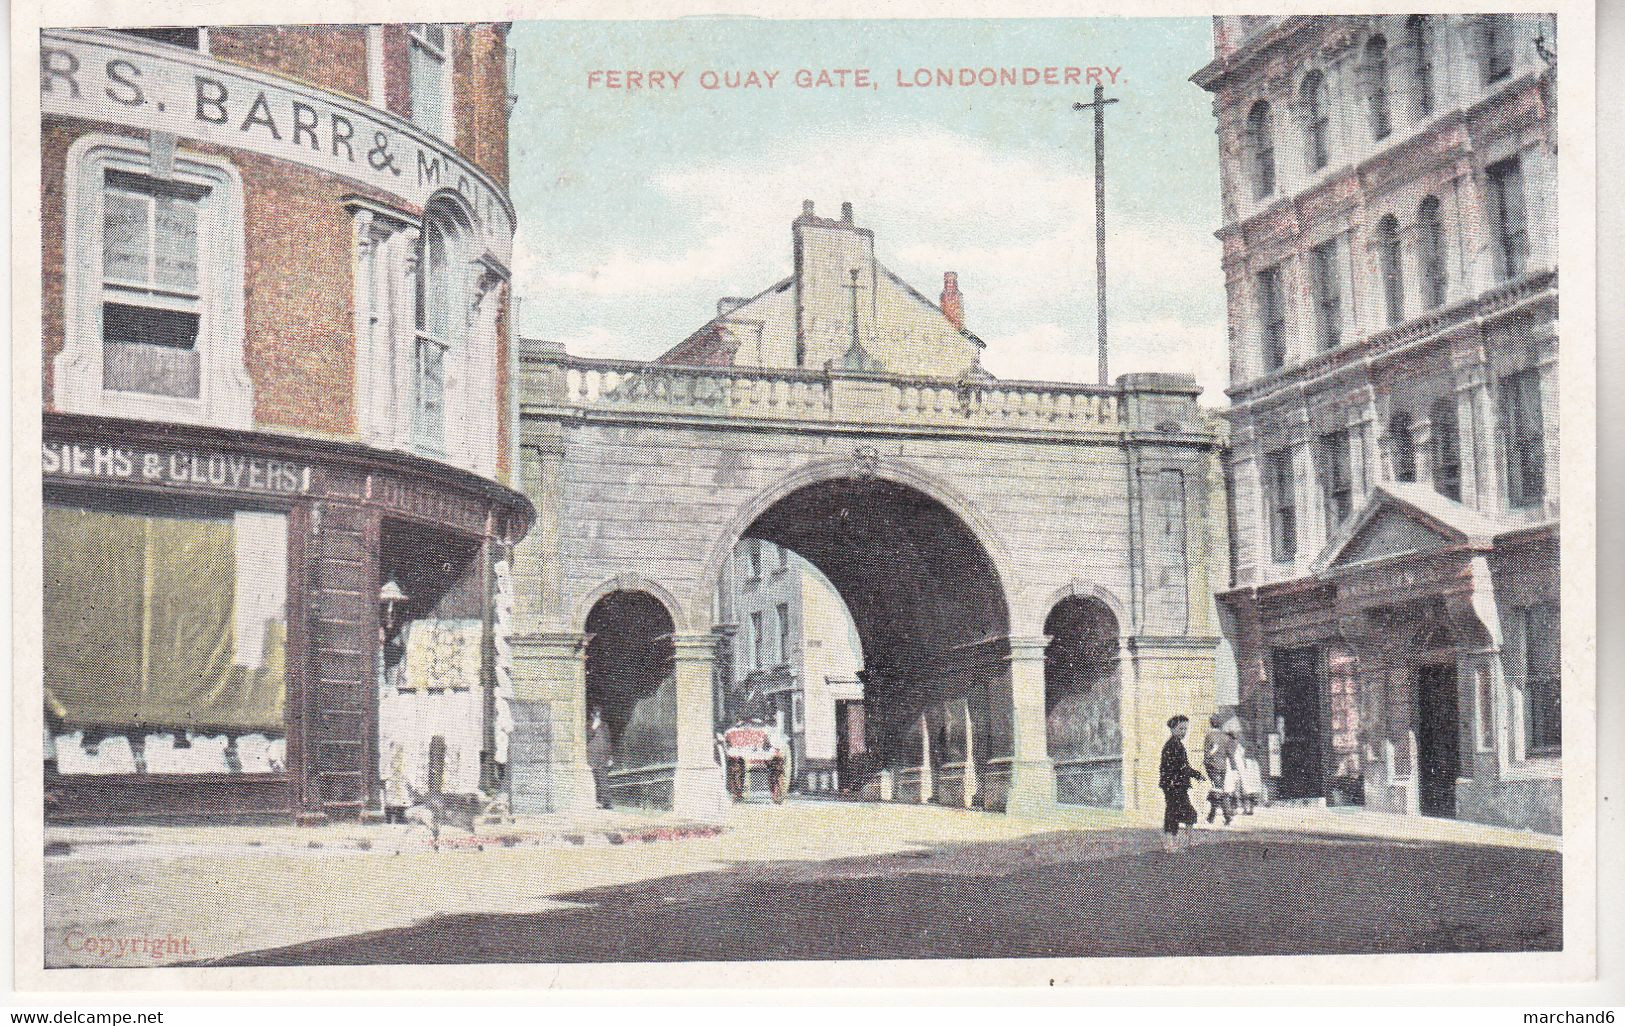 Ferry Quay Gate , Londonderry - Londonderry